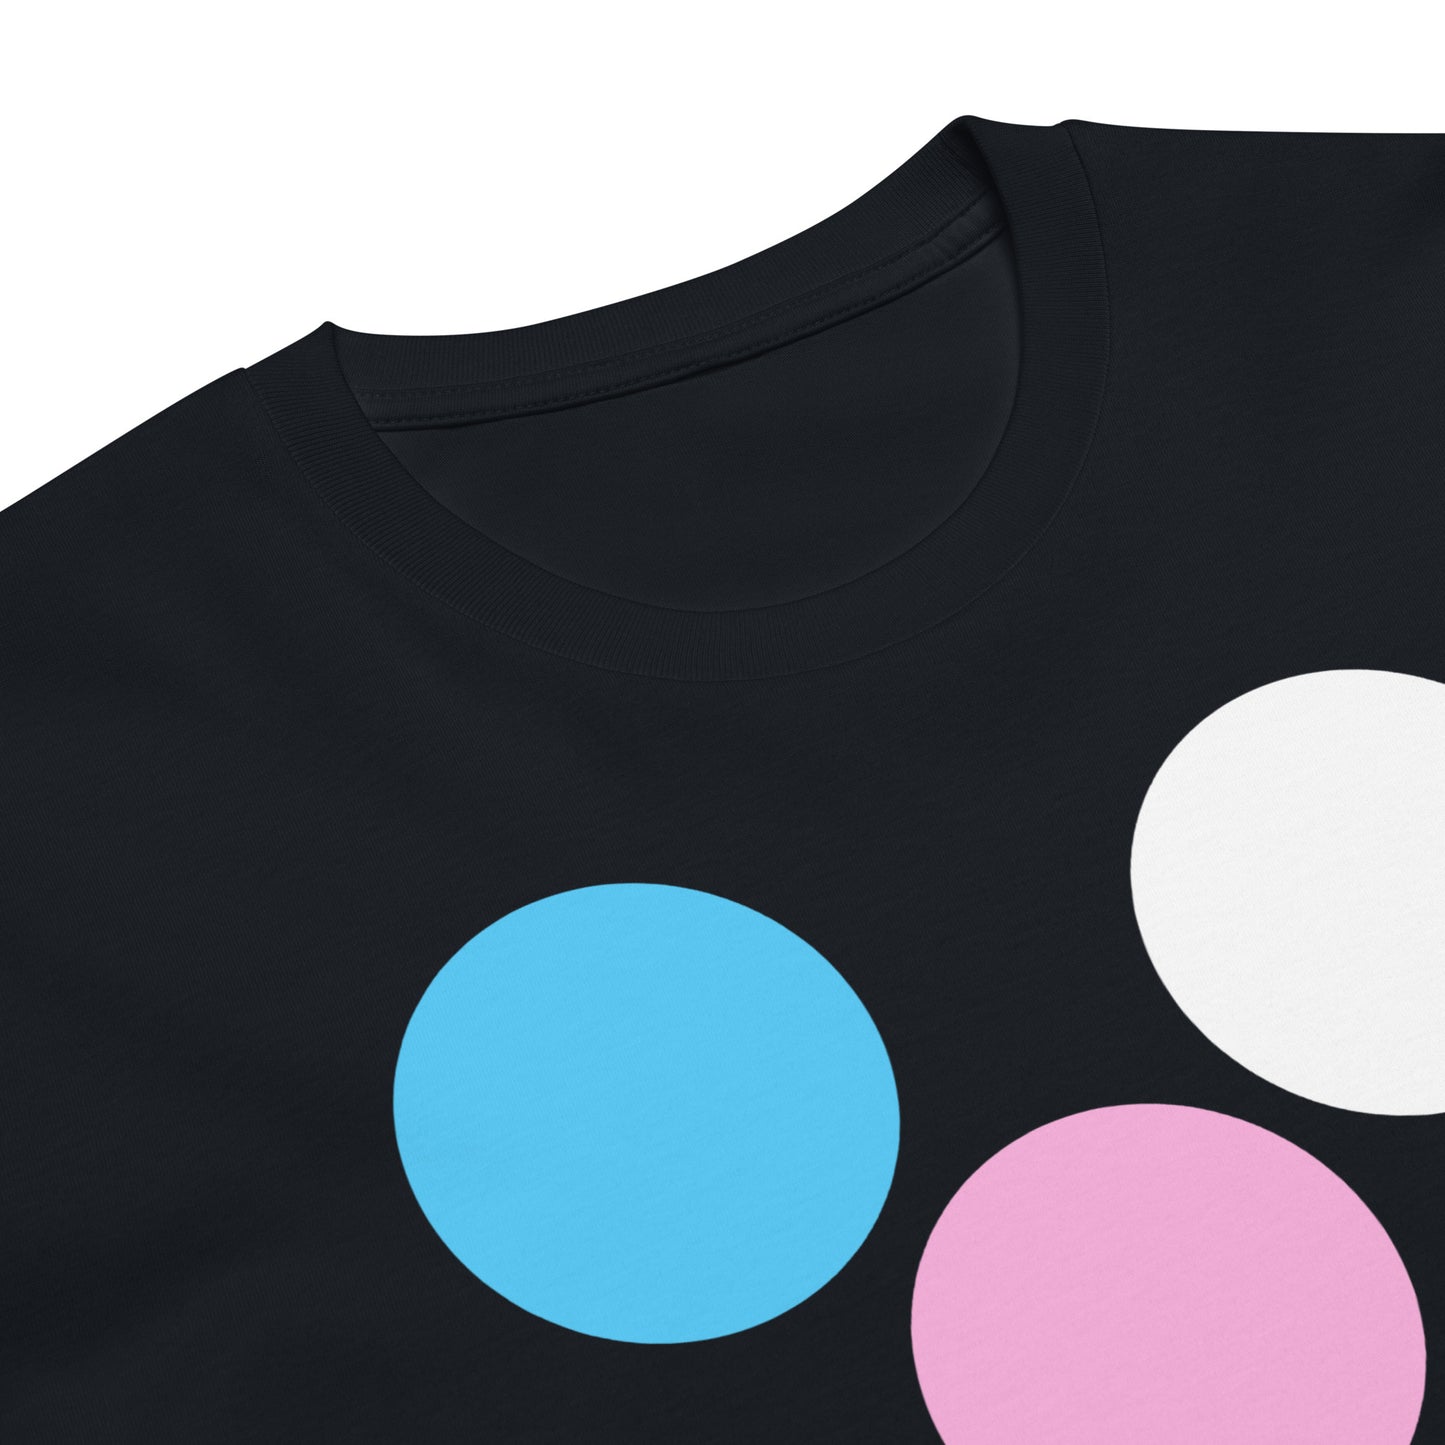 Teen Blue Pink White Pride 'five dots' Casual T-Shirt